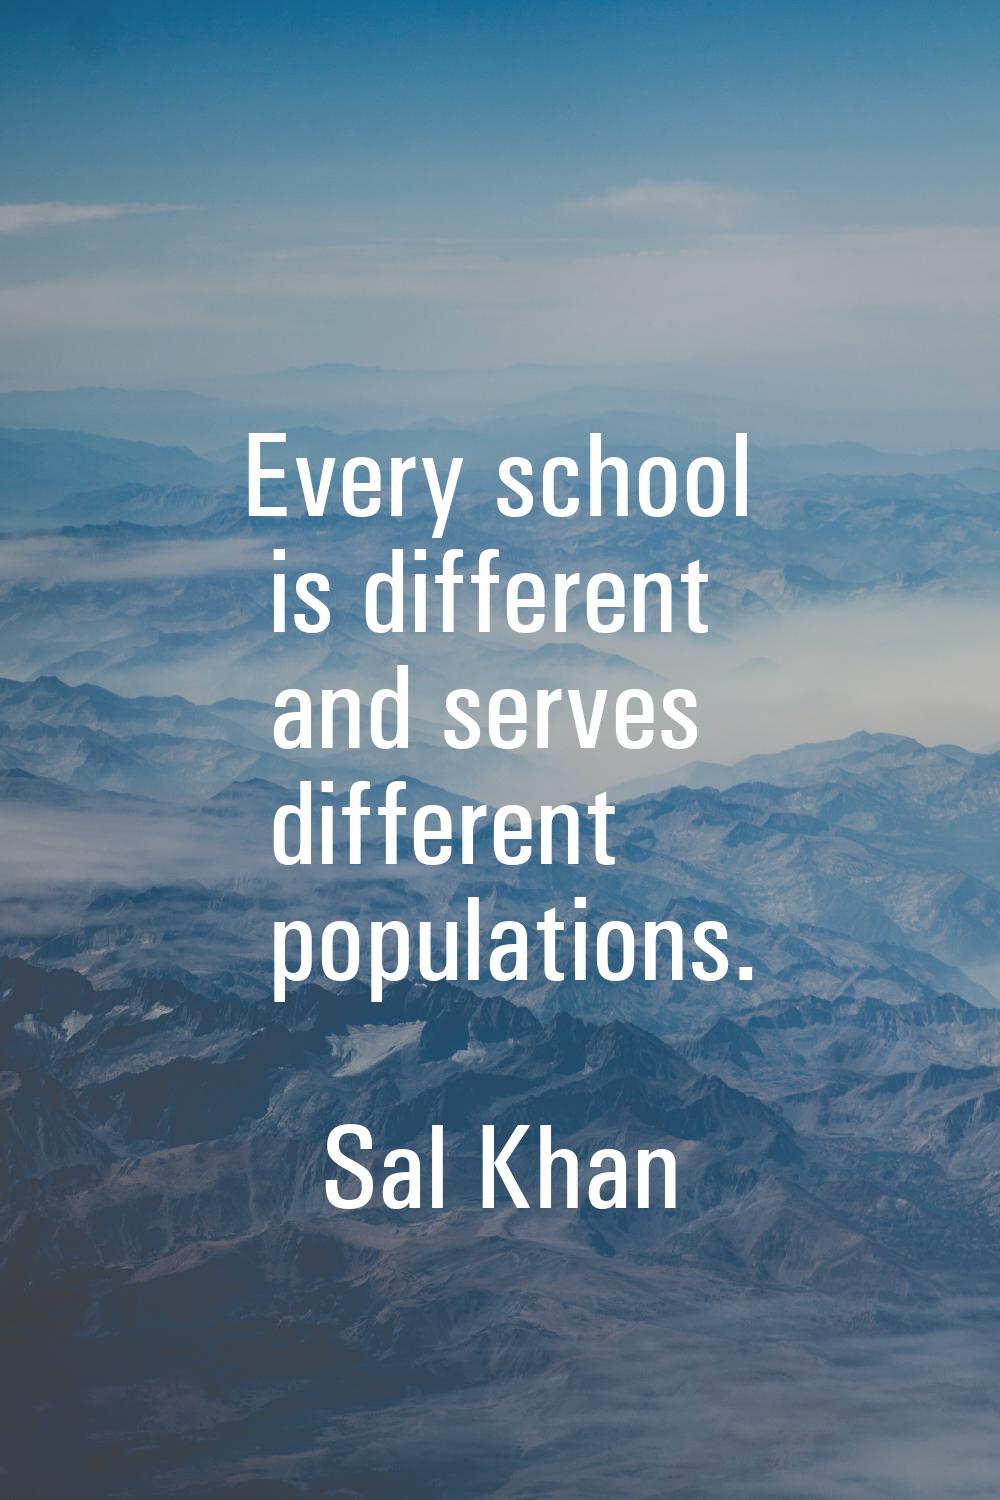 Every school is different and serves different populations.